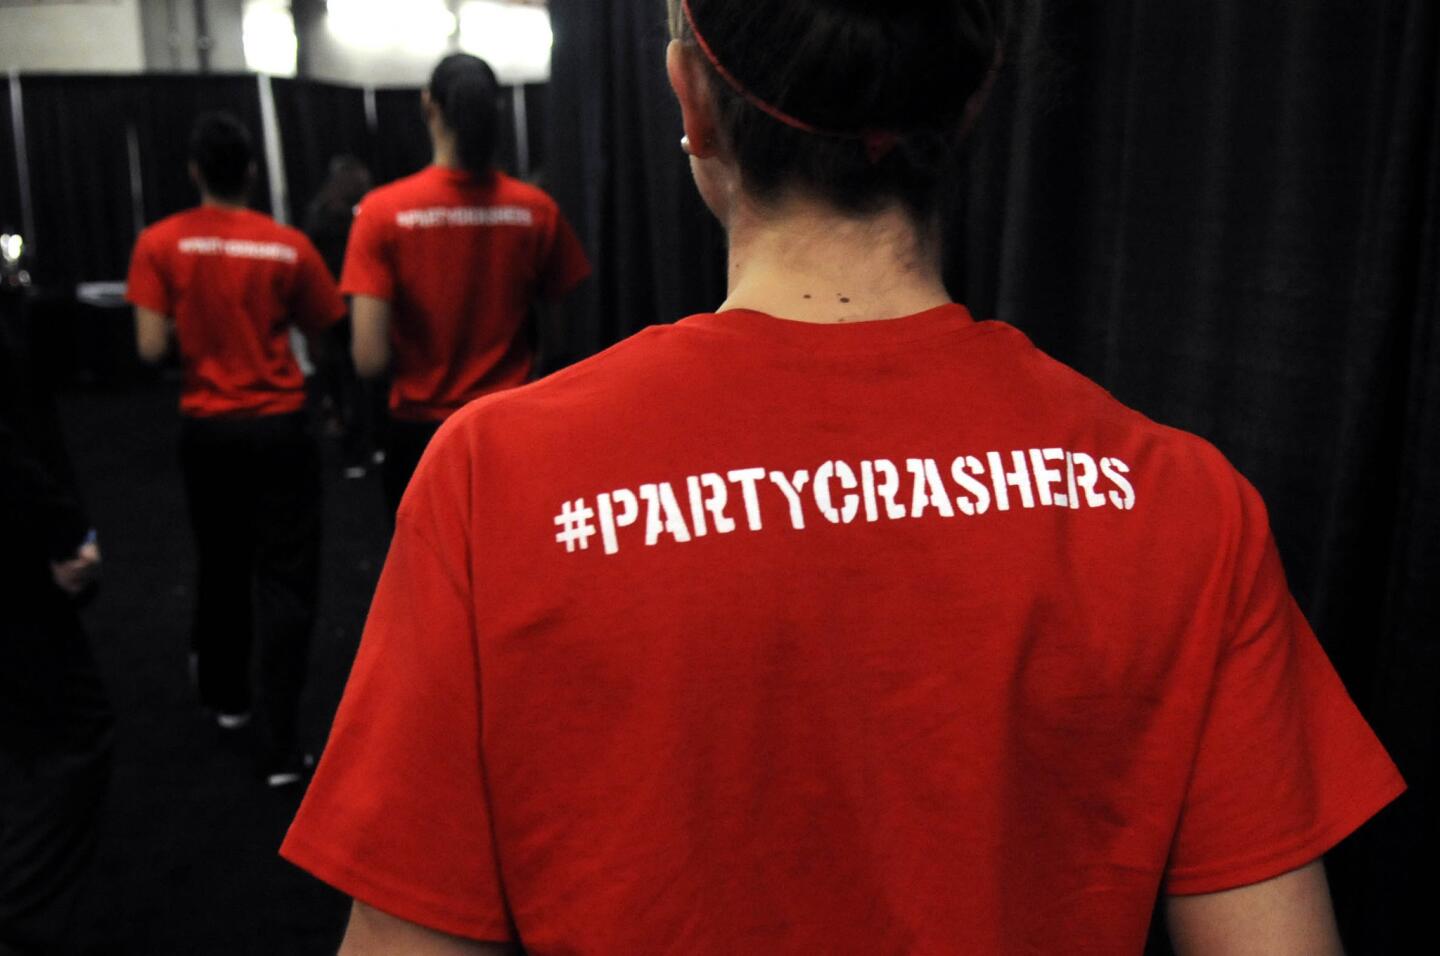 The Louisville women's team wear tee shirts with the hashtag Partycrashers on the back during press conferences at the New Orleans Arena Monday.